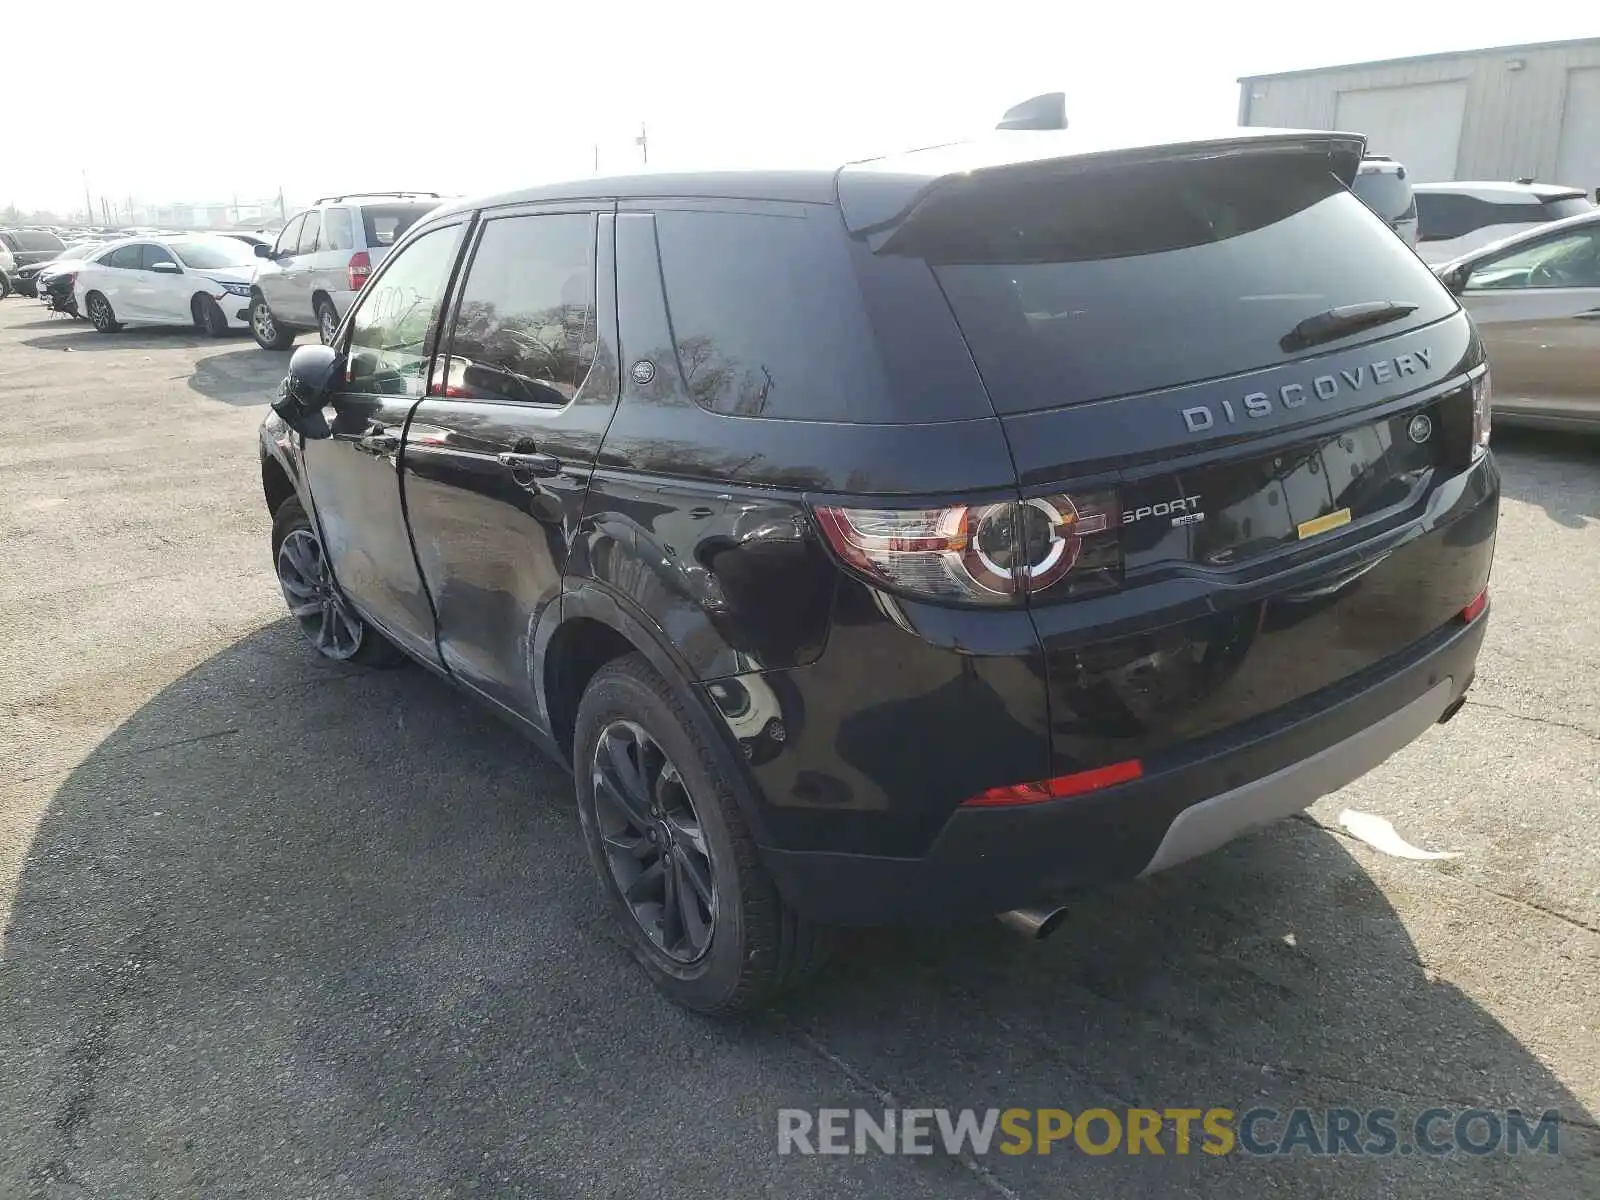 3 Photograph of a damaged car SALCR2FX7KH810869 LAND ROVER DISCOVERY 2019